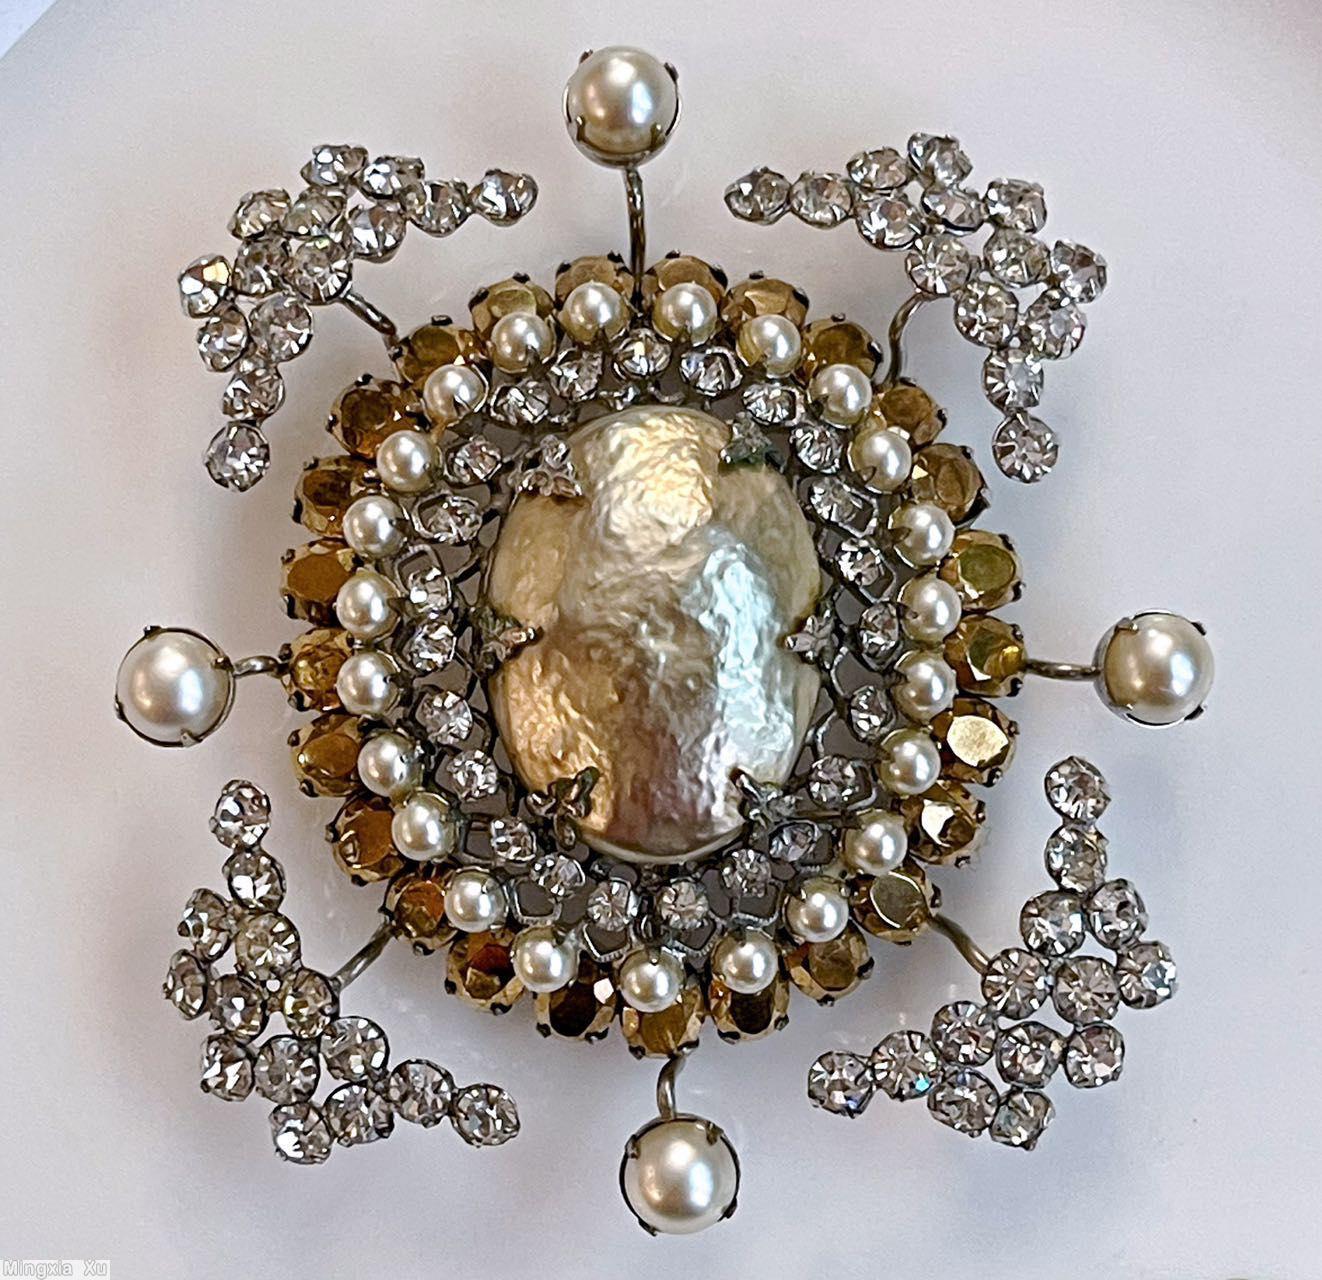 Schreiner large oval shaped domed radial pin large oval faceted crystal center 23 surrounding small chaton 26 small oval stone 4 single chaton branch 4 wide arrow head branch large oval baroque pearl center surrounding small crystal chaton faux pearl small oval facete topaz jewelry